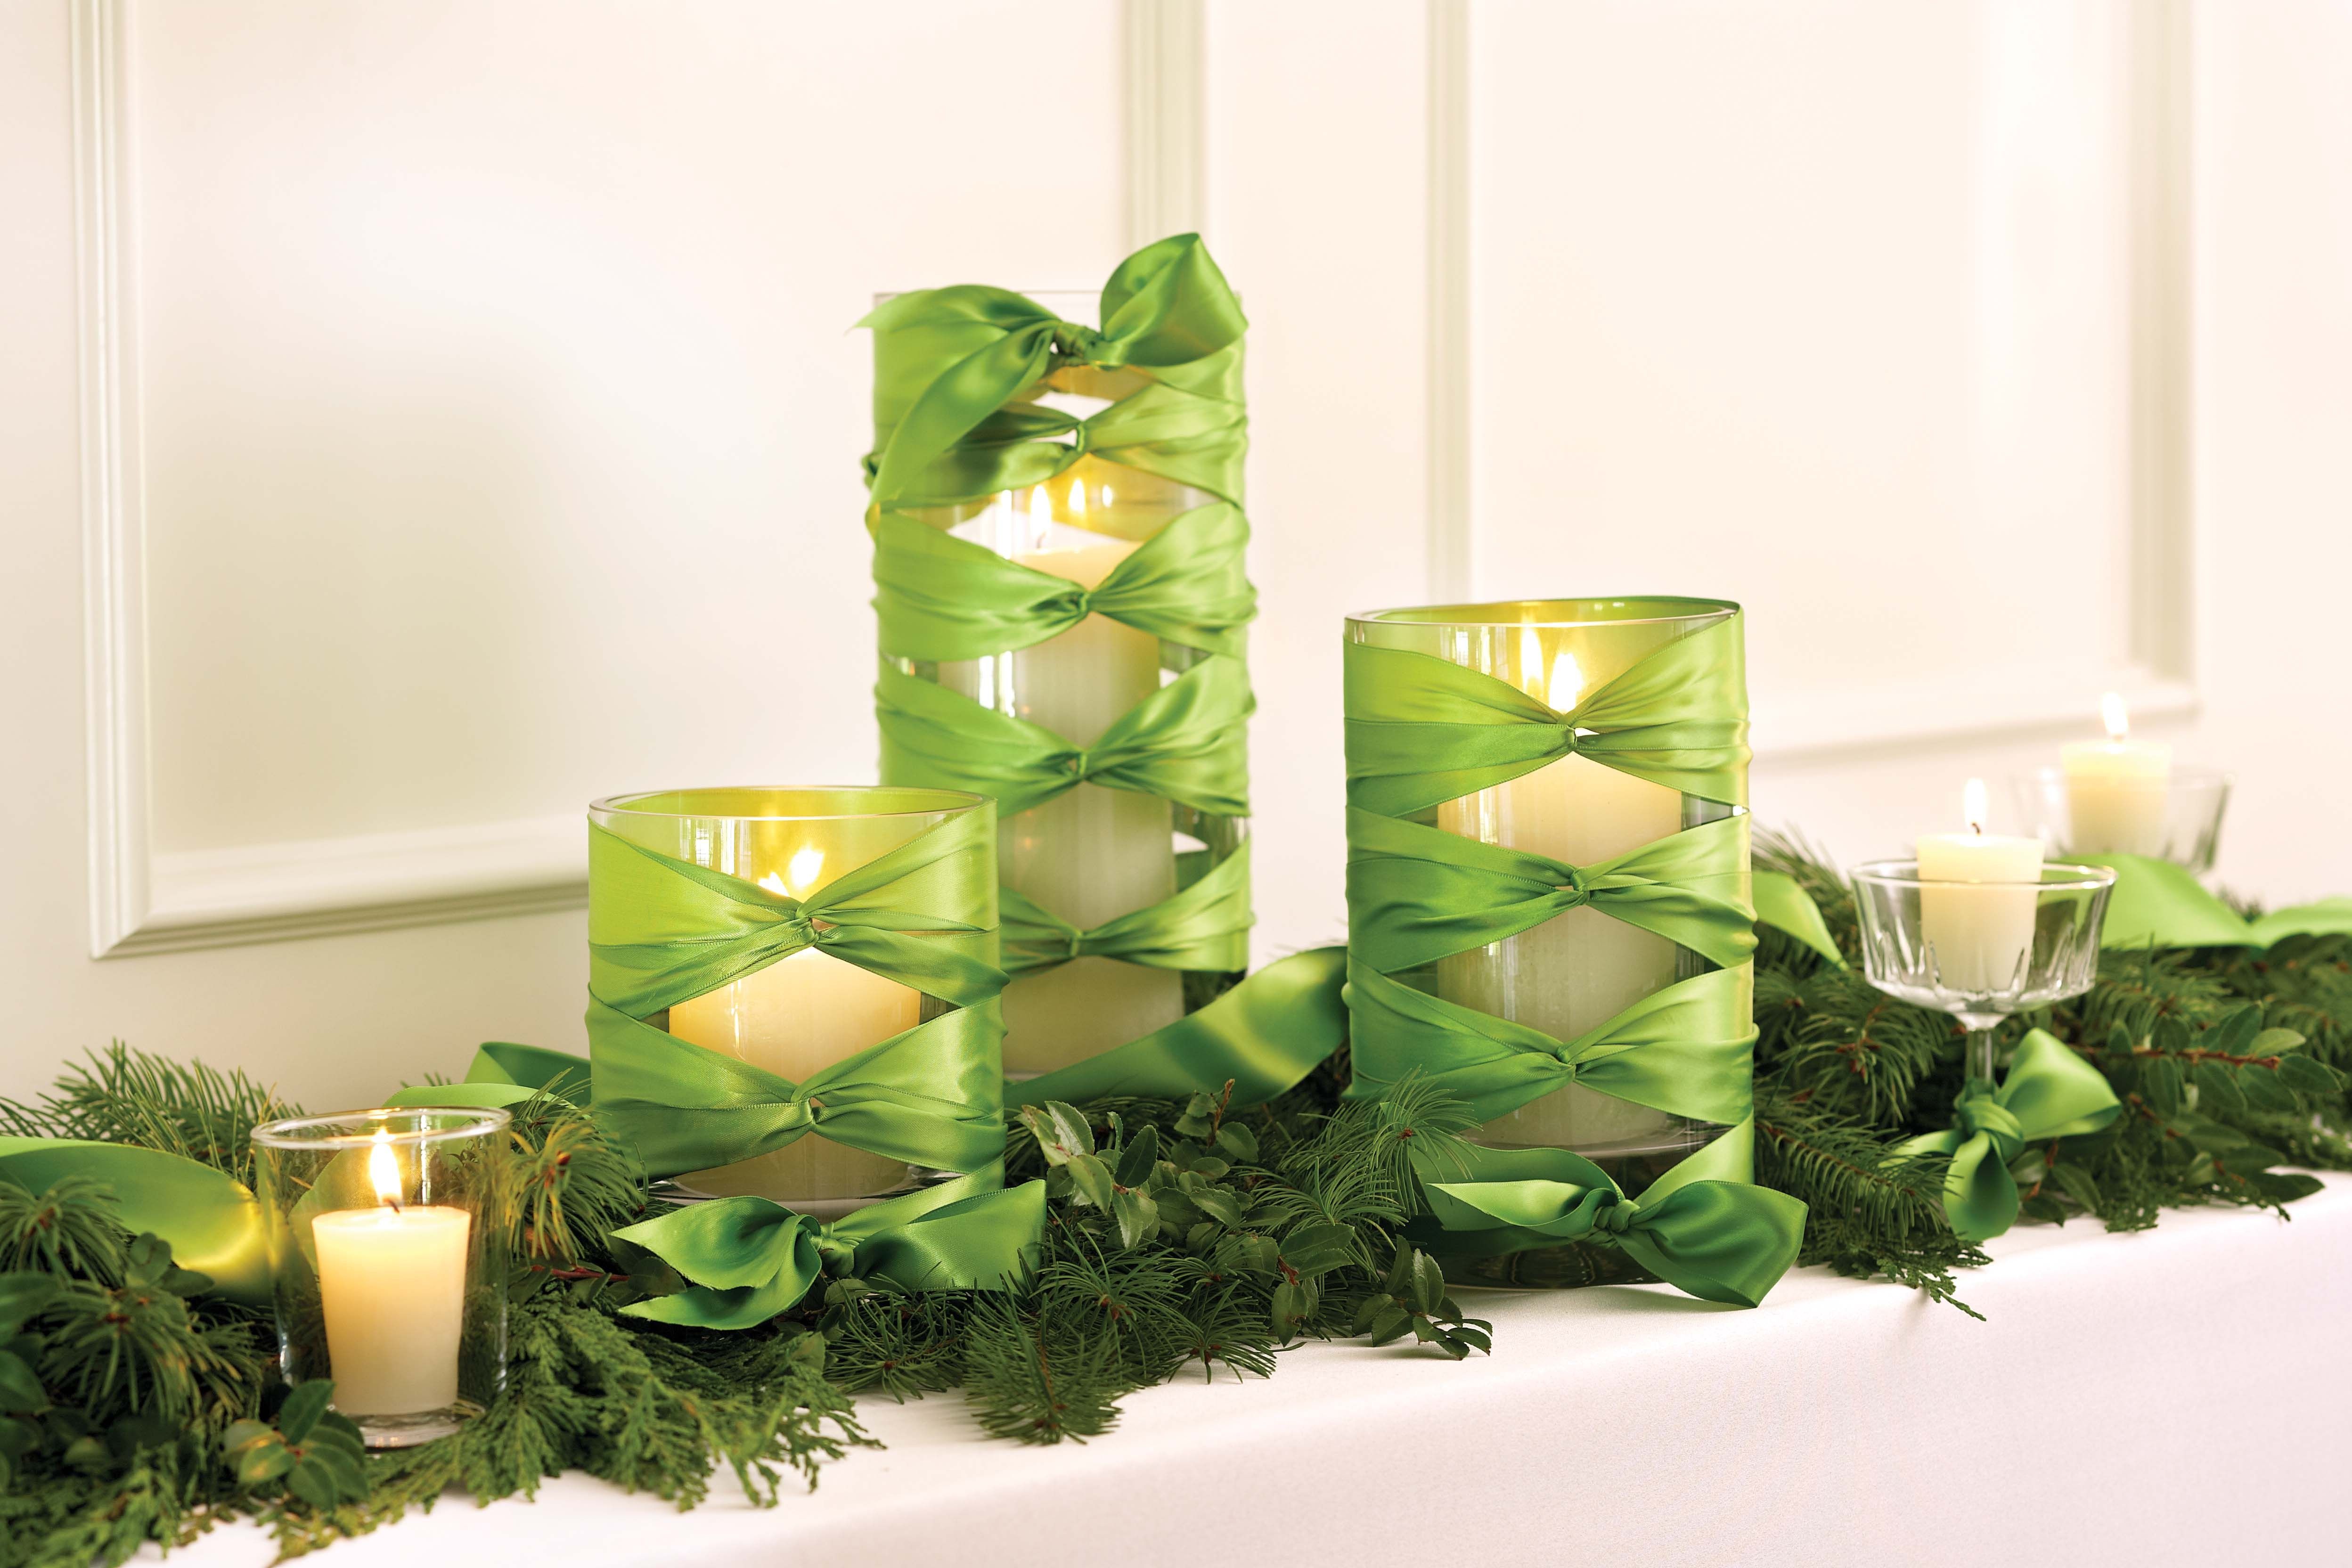 Beauty DIY Candle Non Floral Centerpiece With Decorative Green Tape (View 21 of 35)